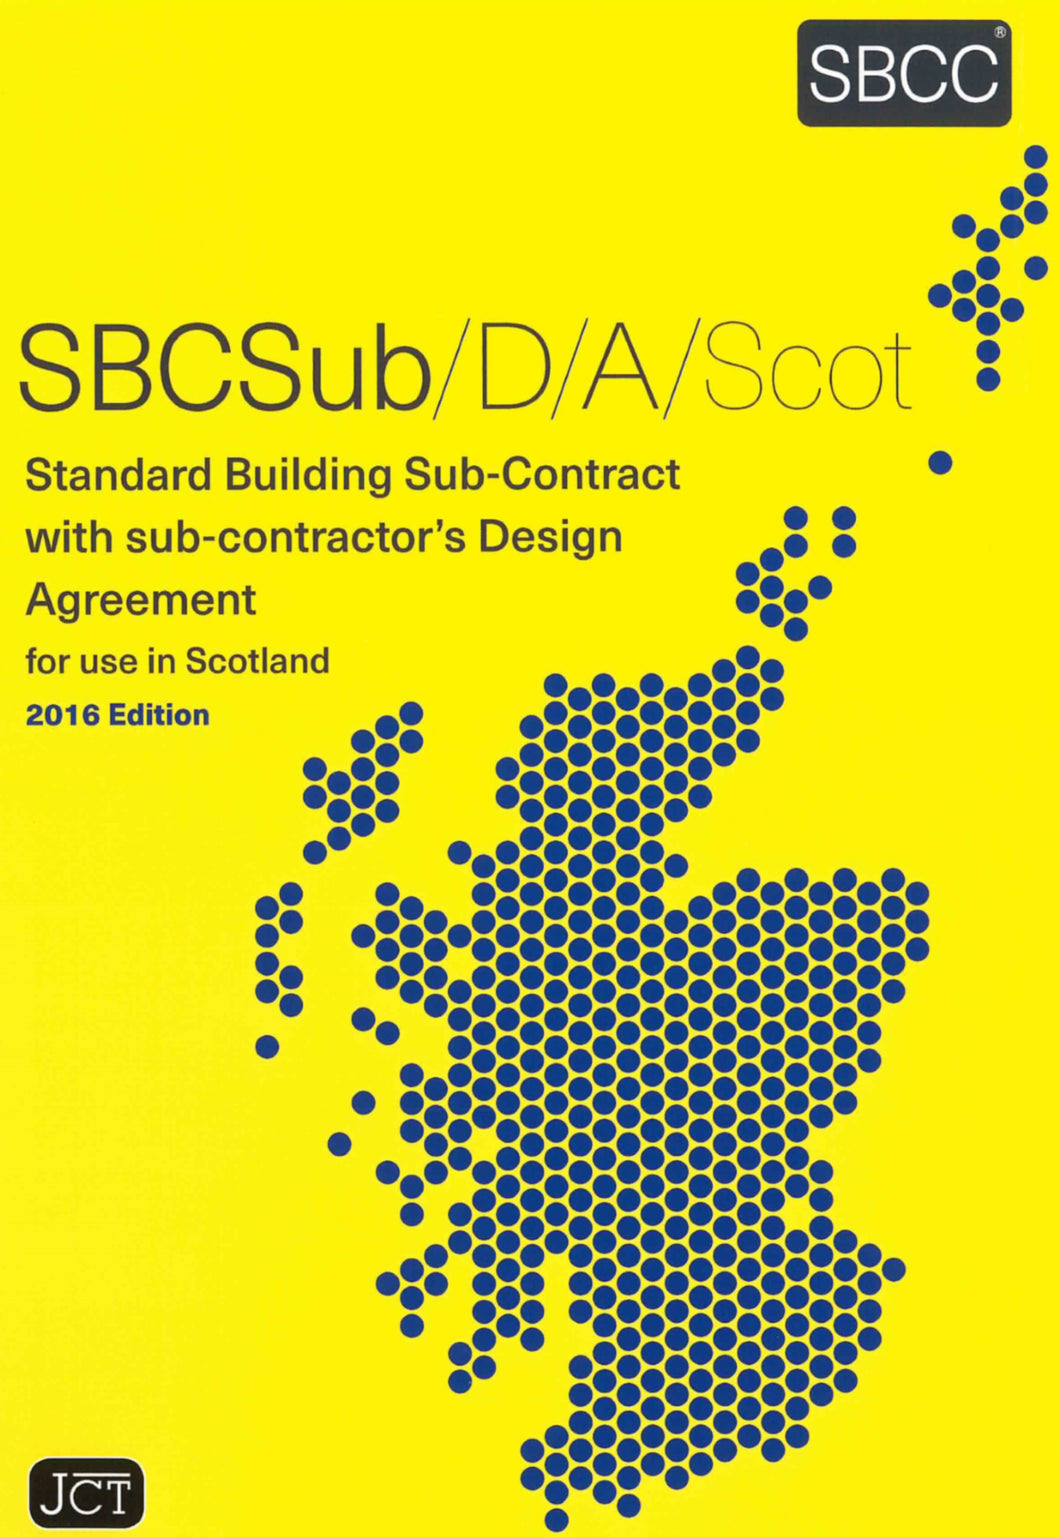 Standard Building Sub-Contract with Sub-Contractor's Design Agreement Scotland 2016